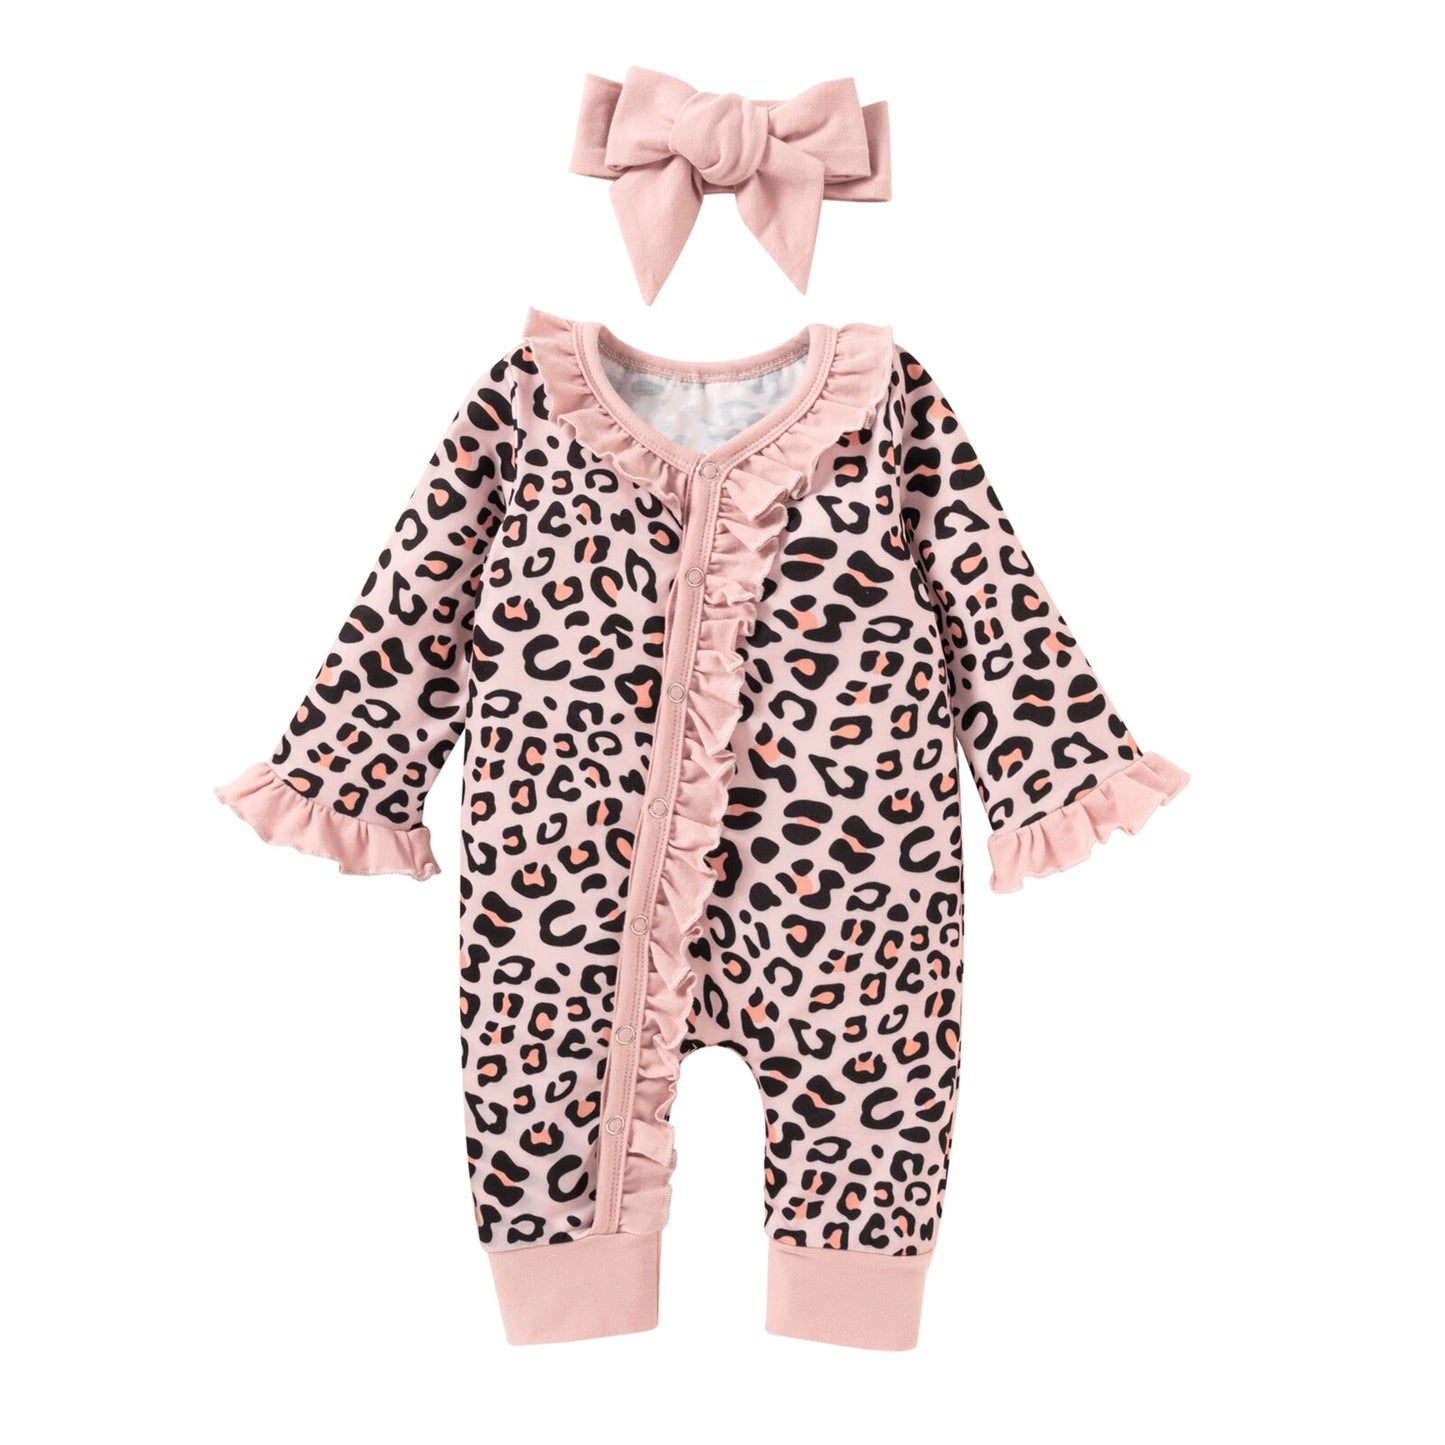 Newborn Baby Girl Clothes Cotton Long Sleeve Stripe Floral Single Breasted Jumpsuit - BTGR8440